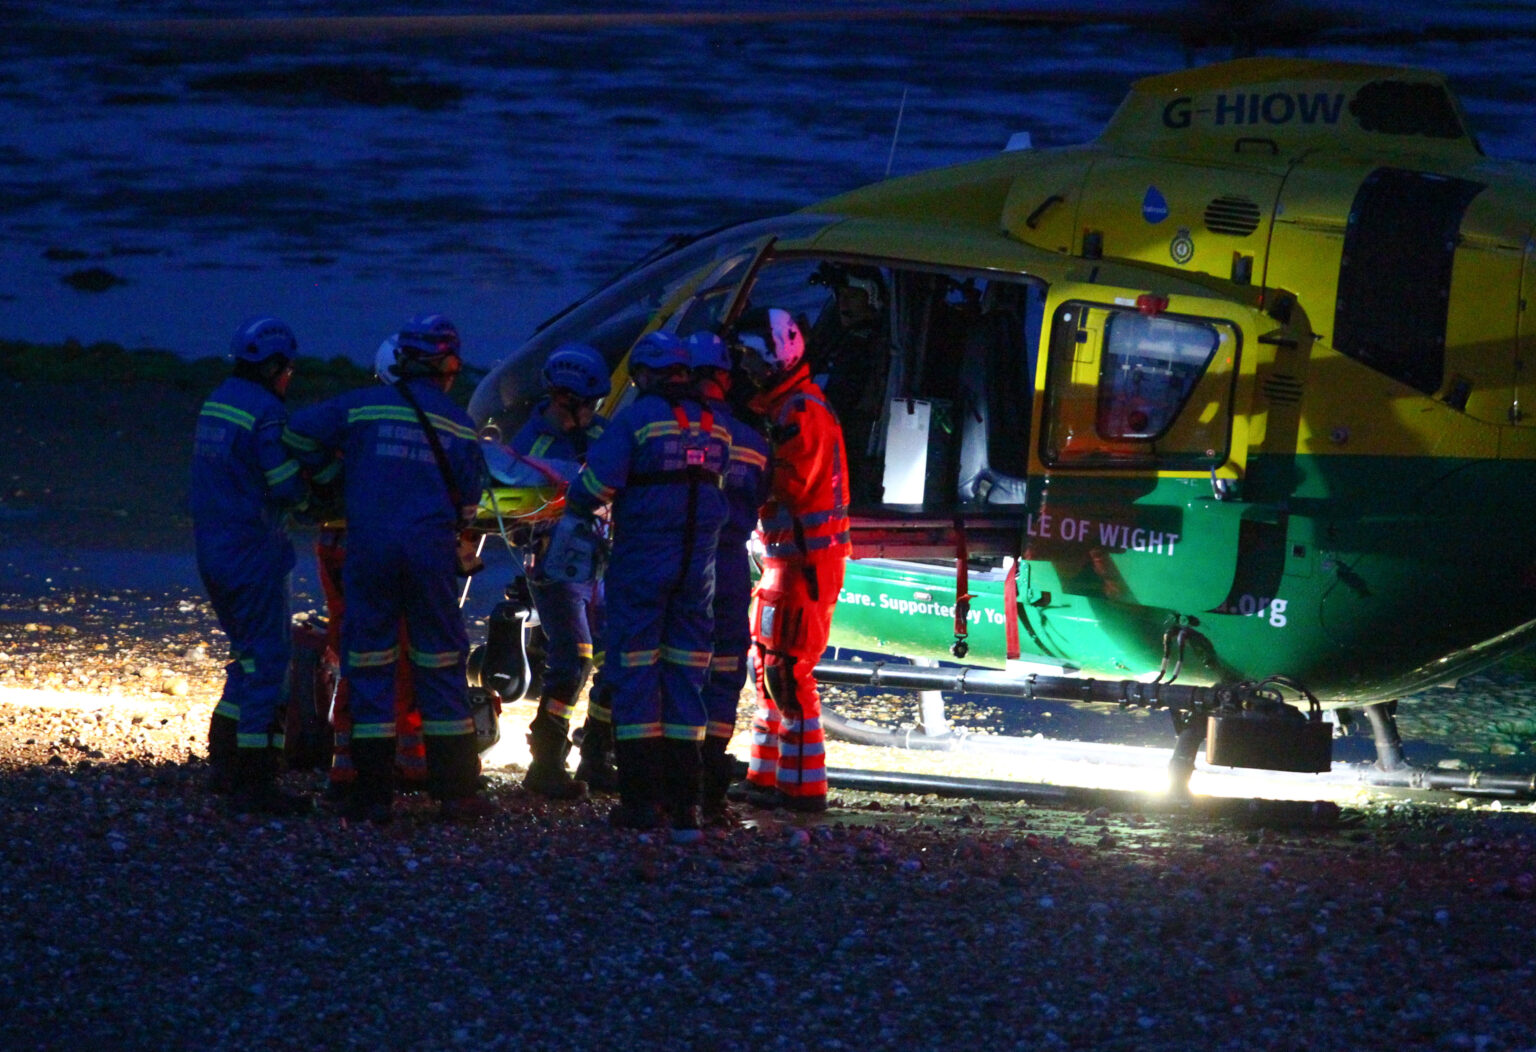 A team of medics loading a patient onto a helicopter that has landed on a beach at night